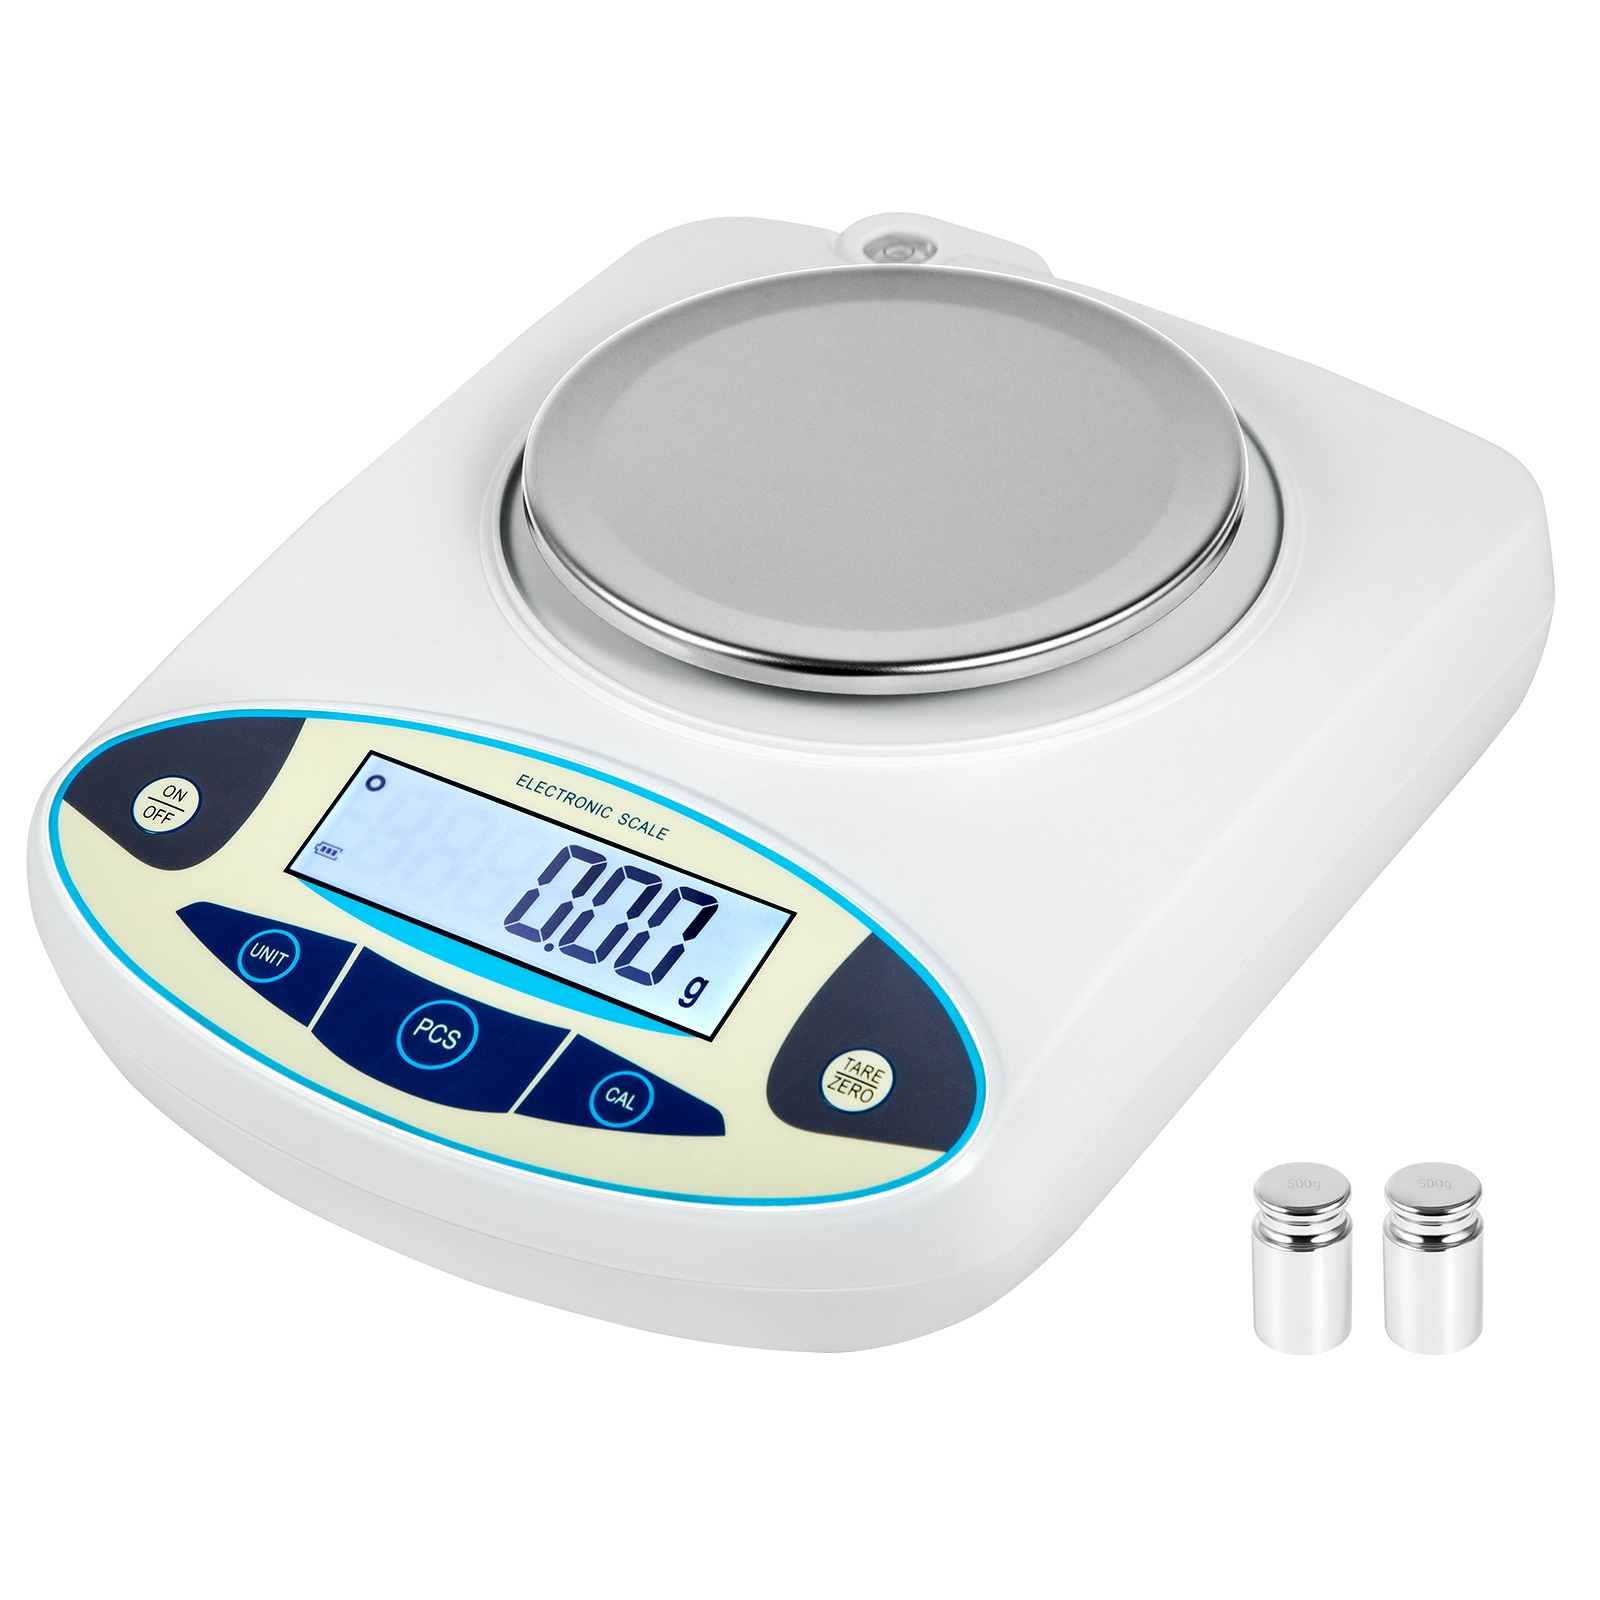 https://d2qc09rl1gfuof.cloudfront.net/product/FXTPMC3000G20TVVR/analytical-balance-m100-1.2.jpg